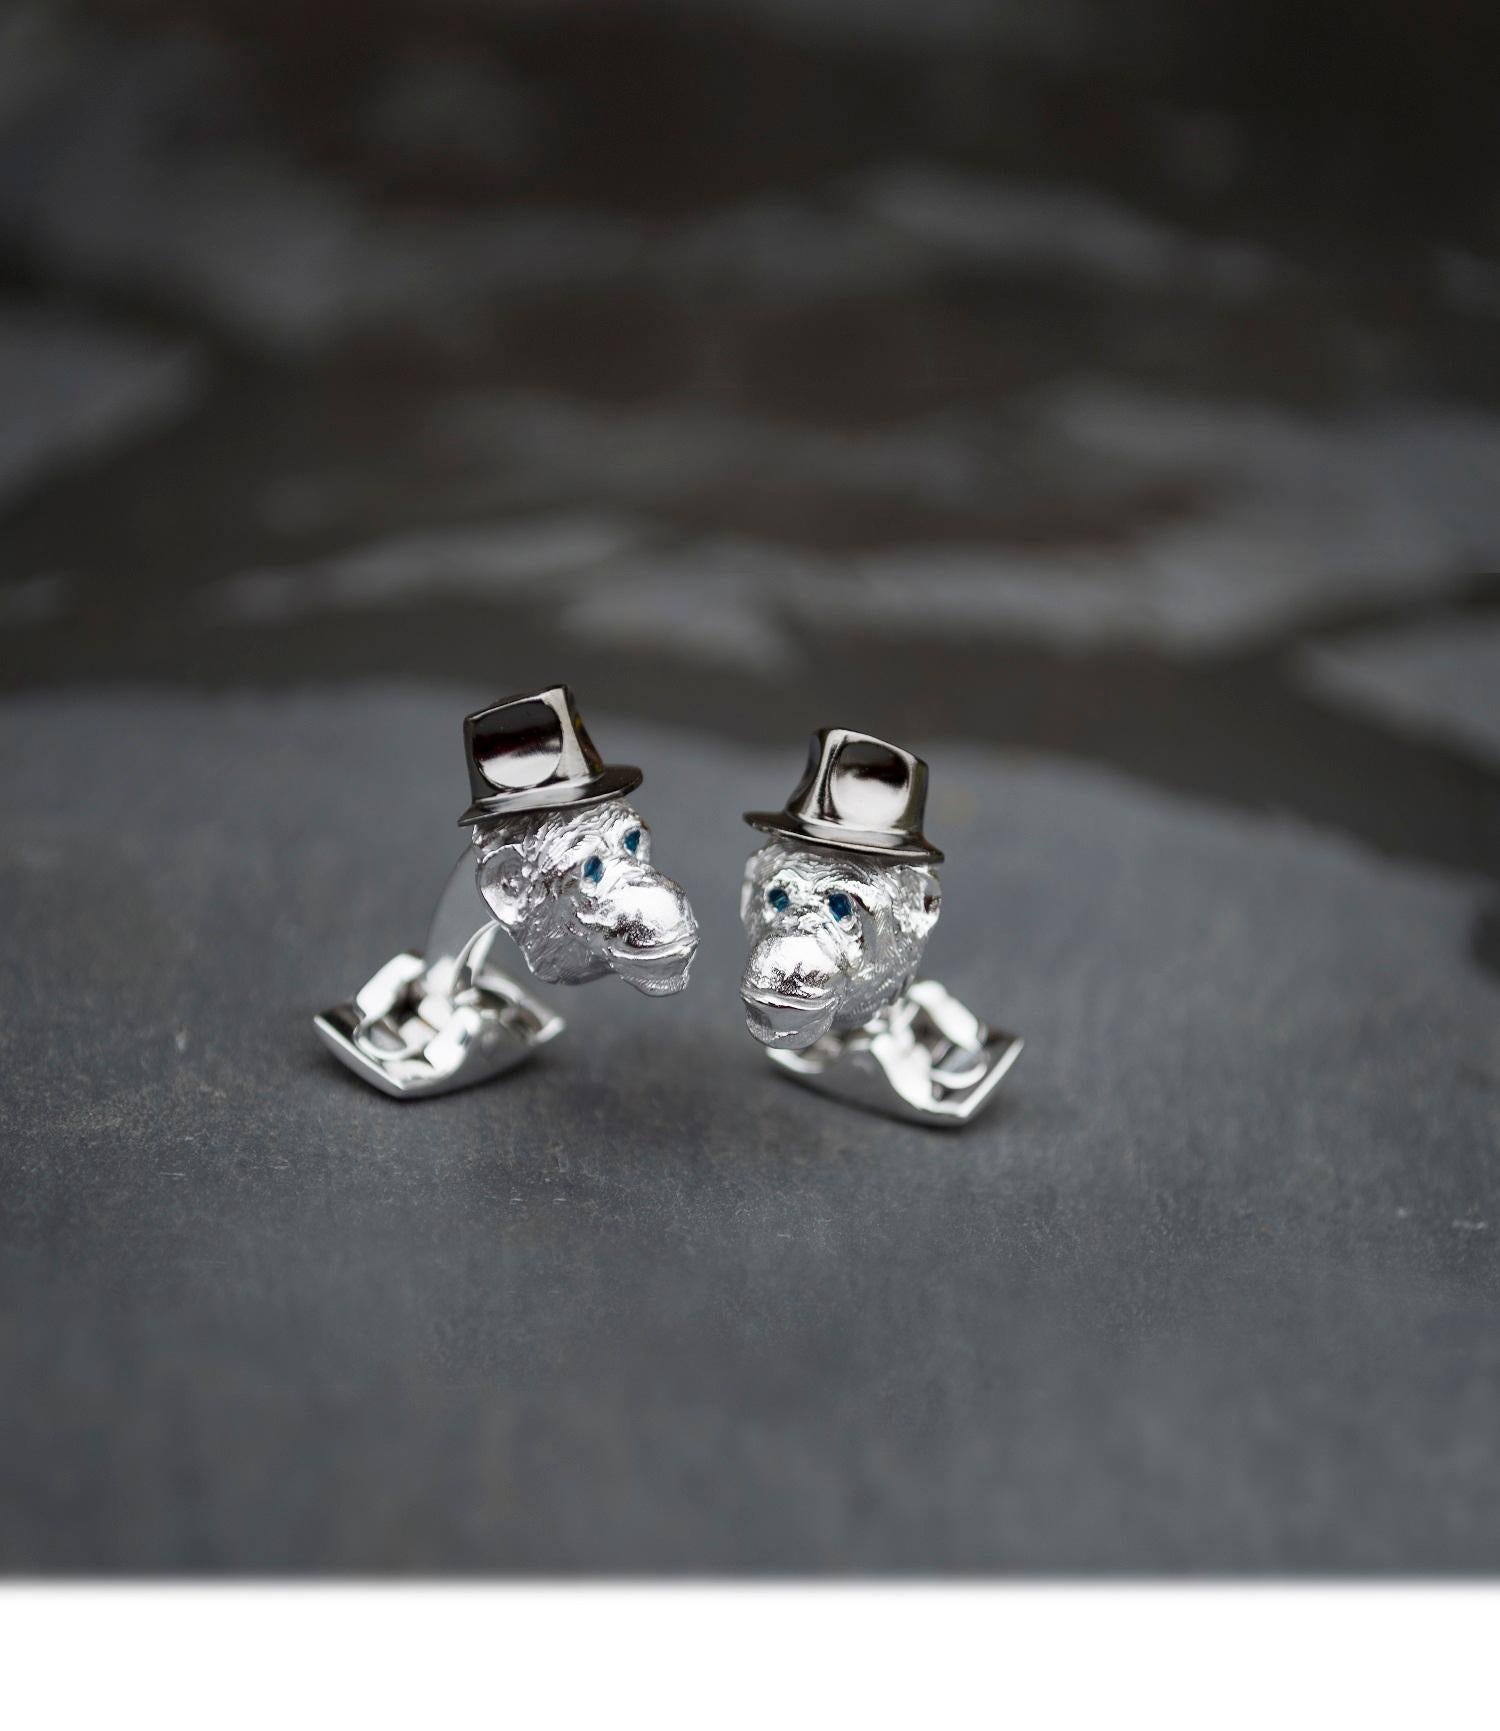 DEAKIN & FRANCIS, Piccadilly Arcade, London

Liven up your outfit with these characterful chimpanzee cufflinks. With a groovy satin finish black rhodium hat, detailed face and hand enamelled eyes, these cufflinks are sure to have you monkeying